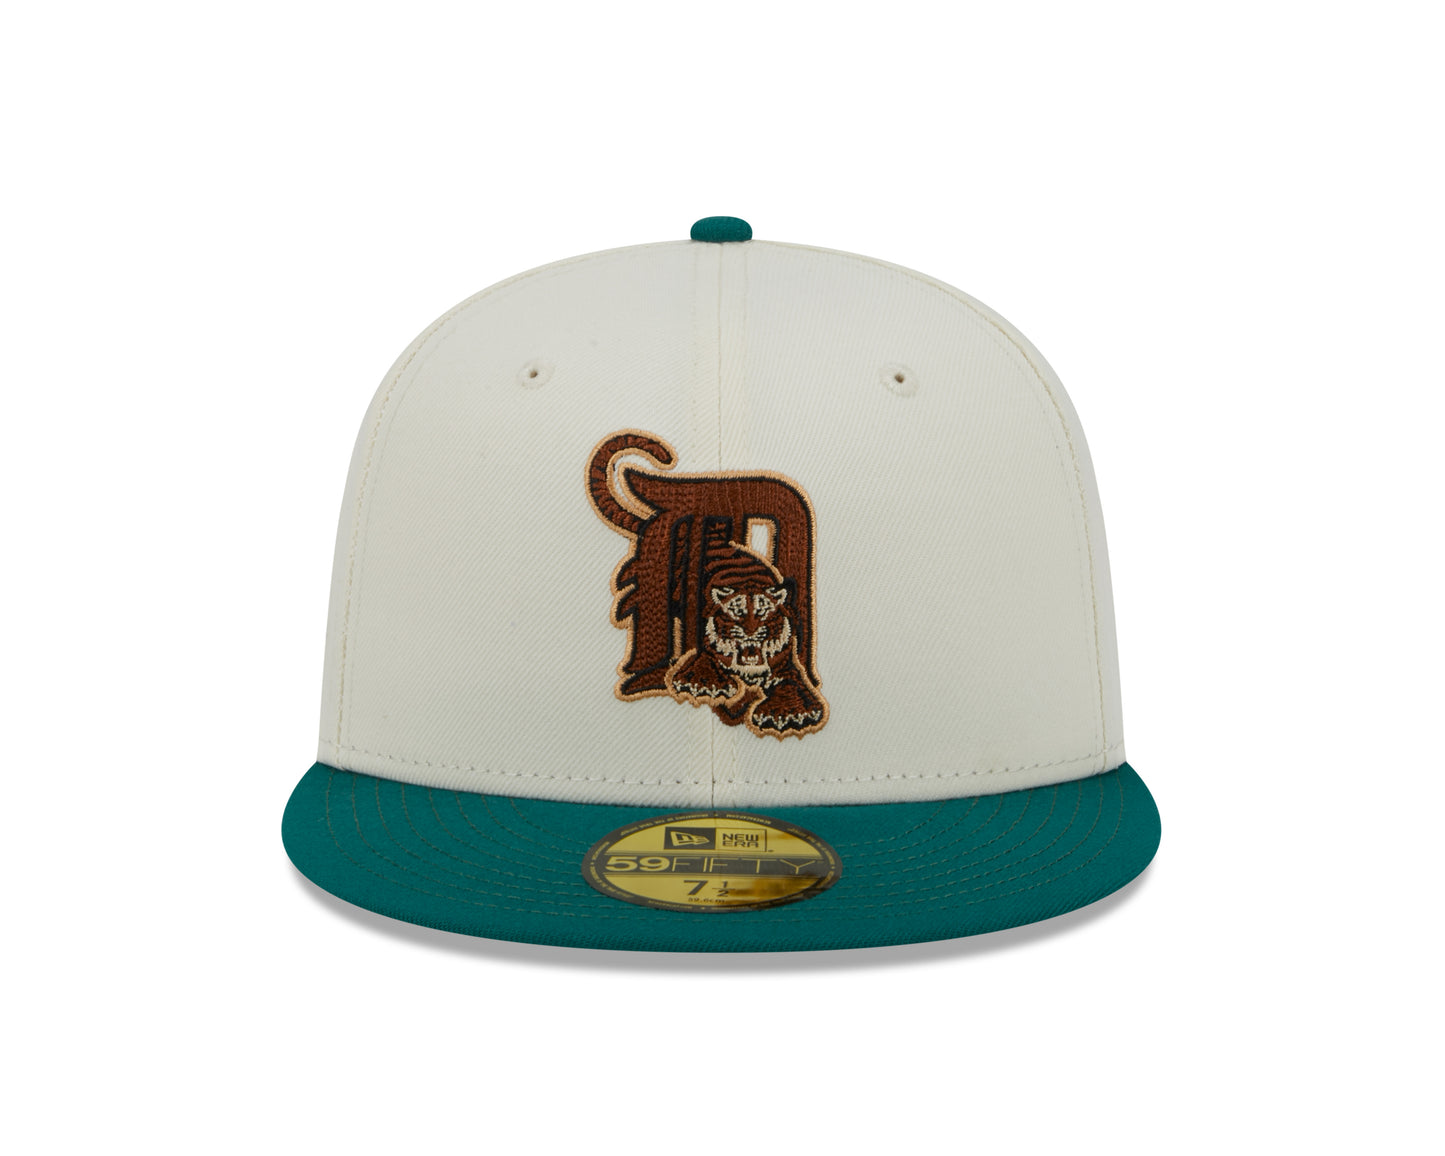 New Era 59Fifty Fitted Cap CAMP Detroit Tigers Tiger Stadium 1912-1999 - White/Green - Headz Up 